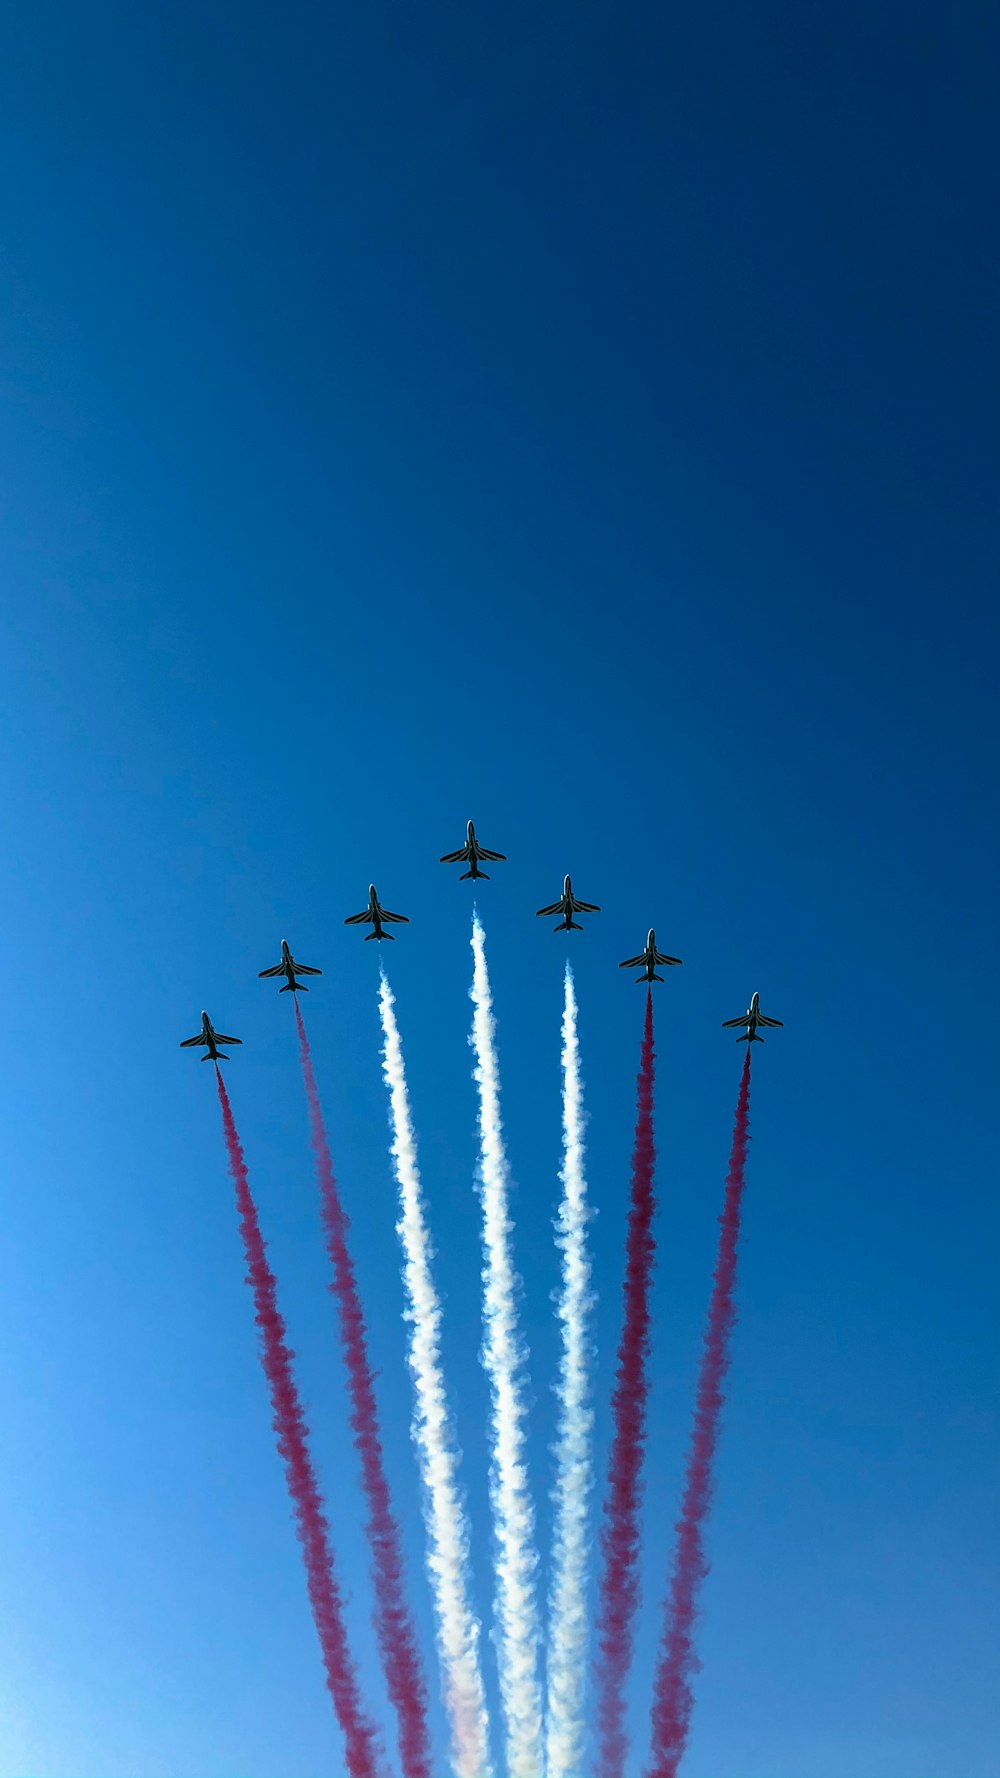 eight red and white jet planes in mid air